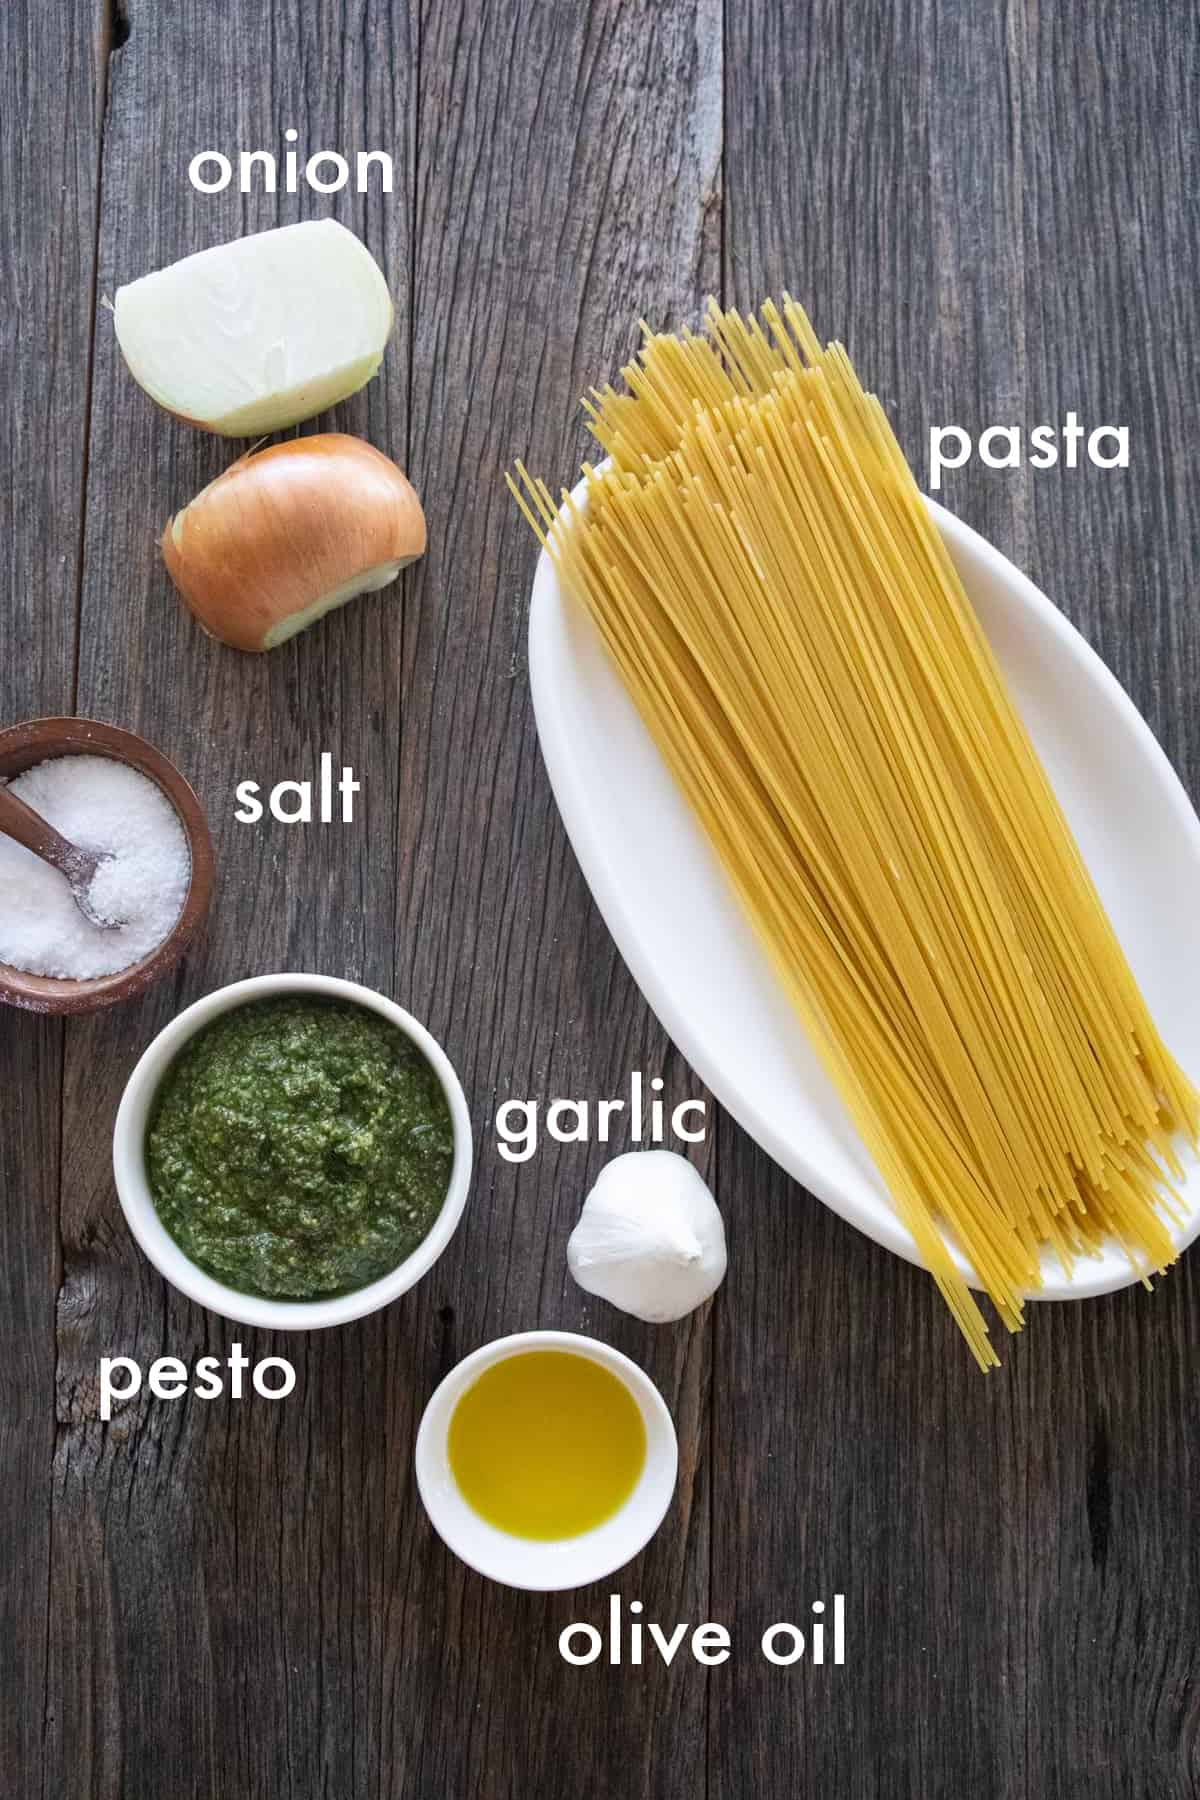 To make this dish you need pesto, pasta, garlic, olive oil and onion. 